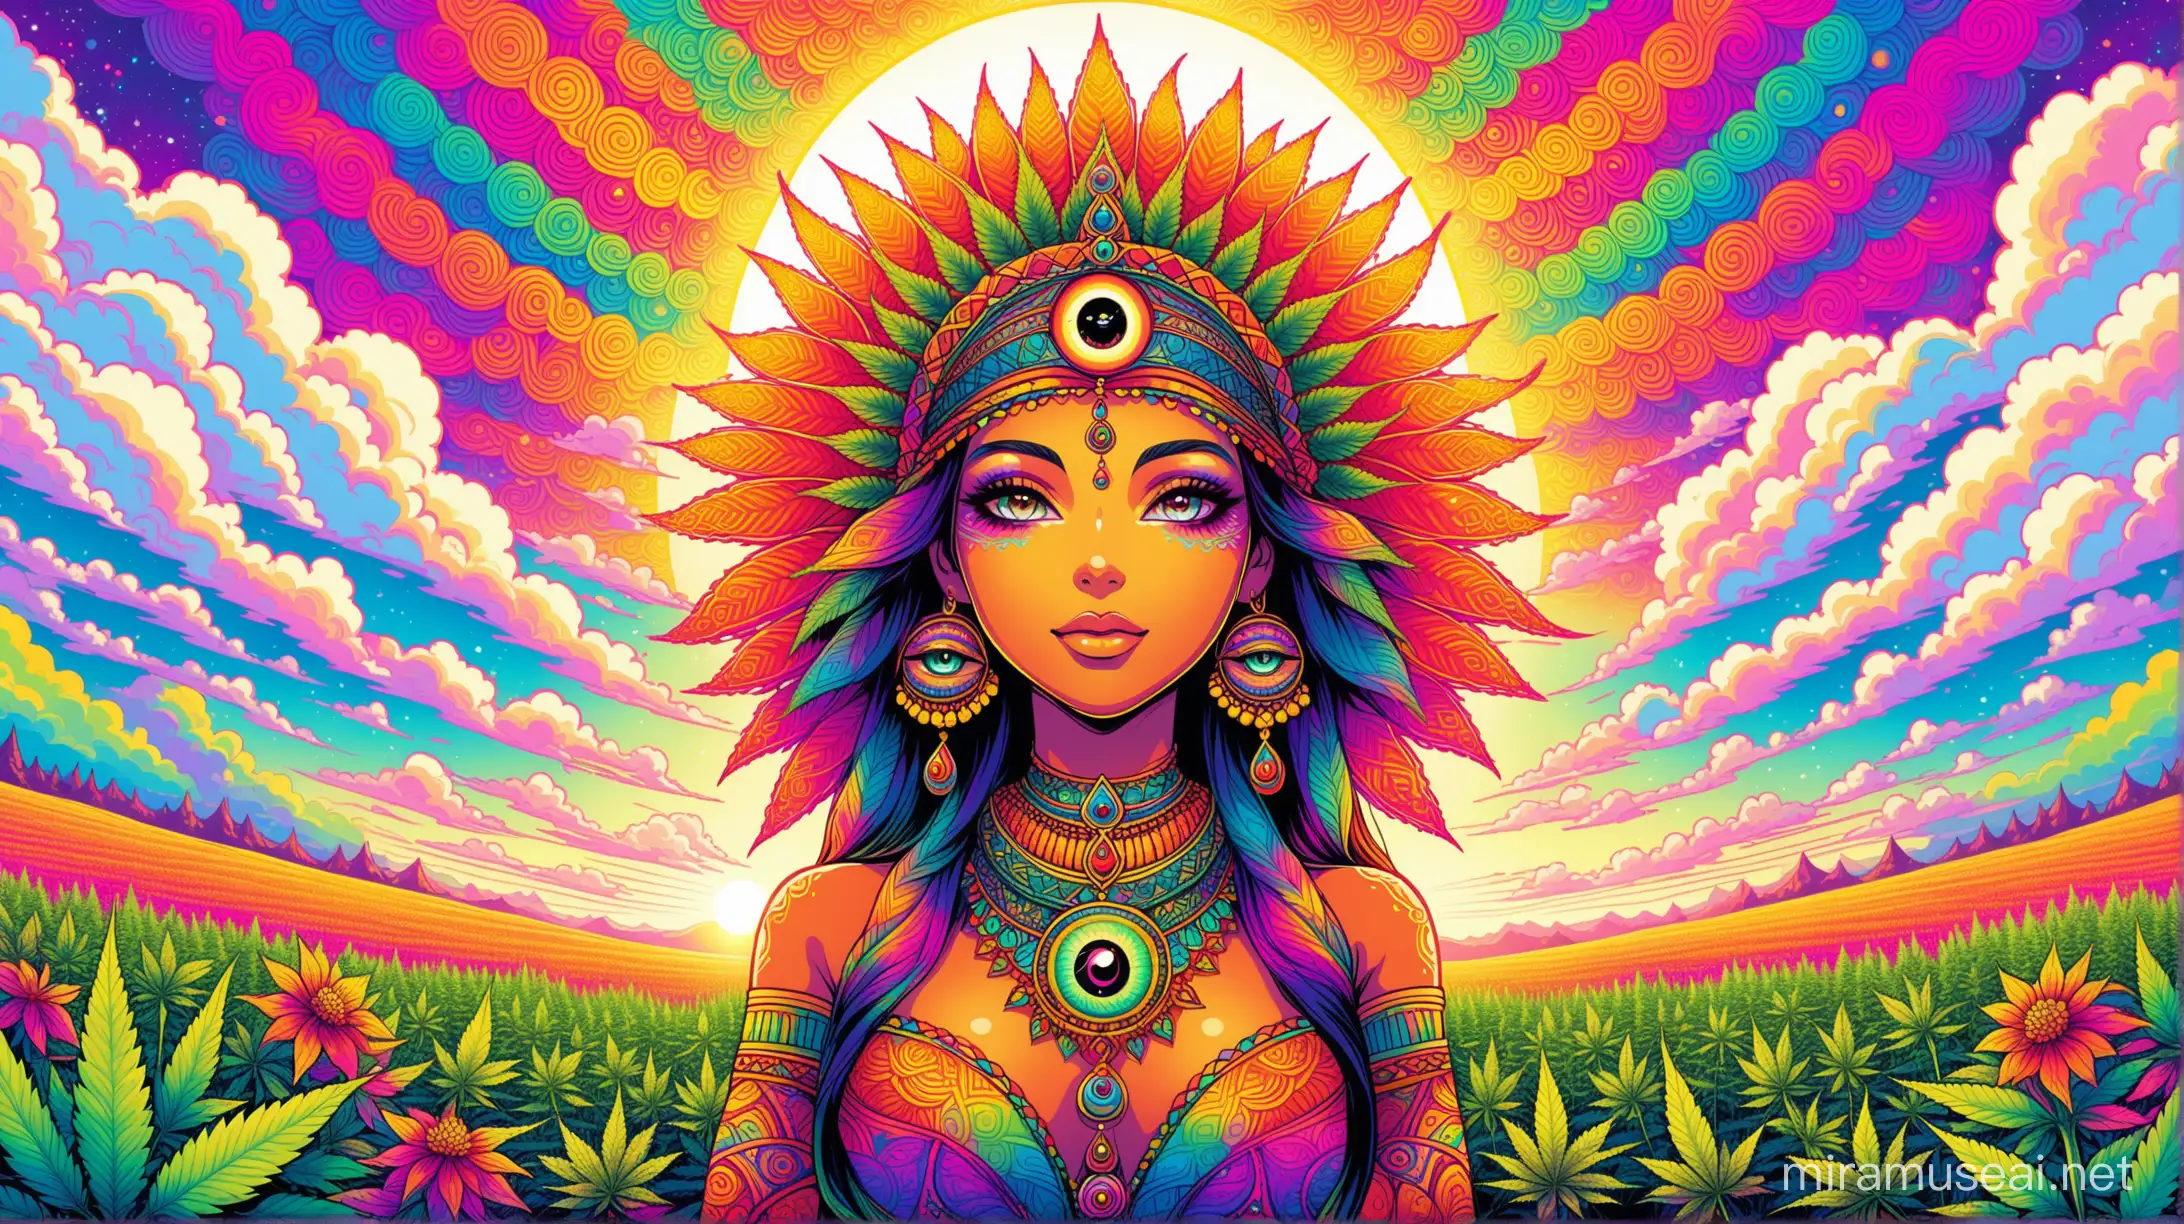 Psychedelic colors and patterns, a field of cannabis, flowers, bright sun, clouds, bright, vibrant colors with an exotic woman with the all seeing third eye up front